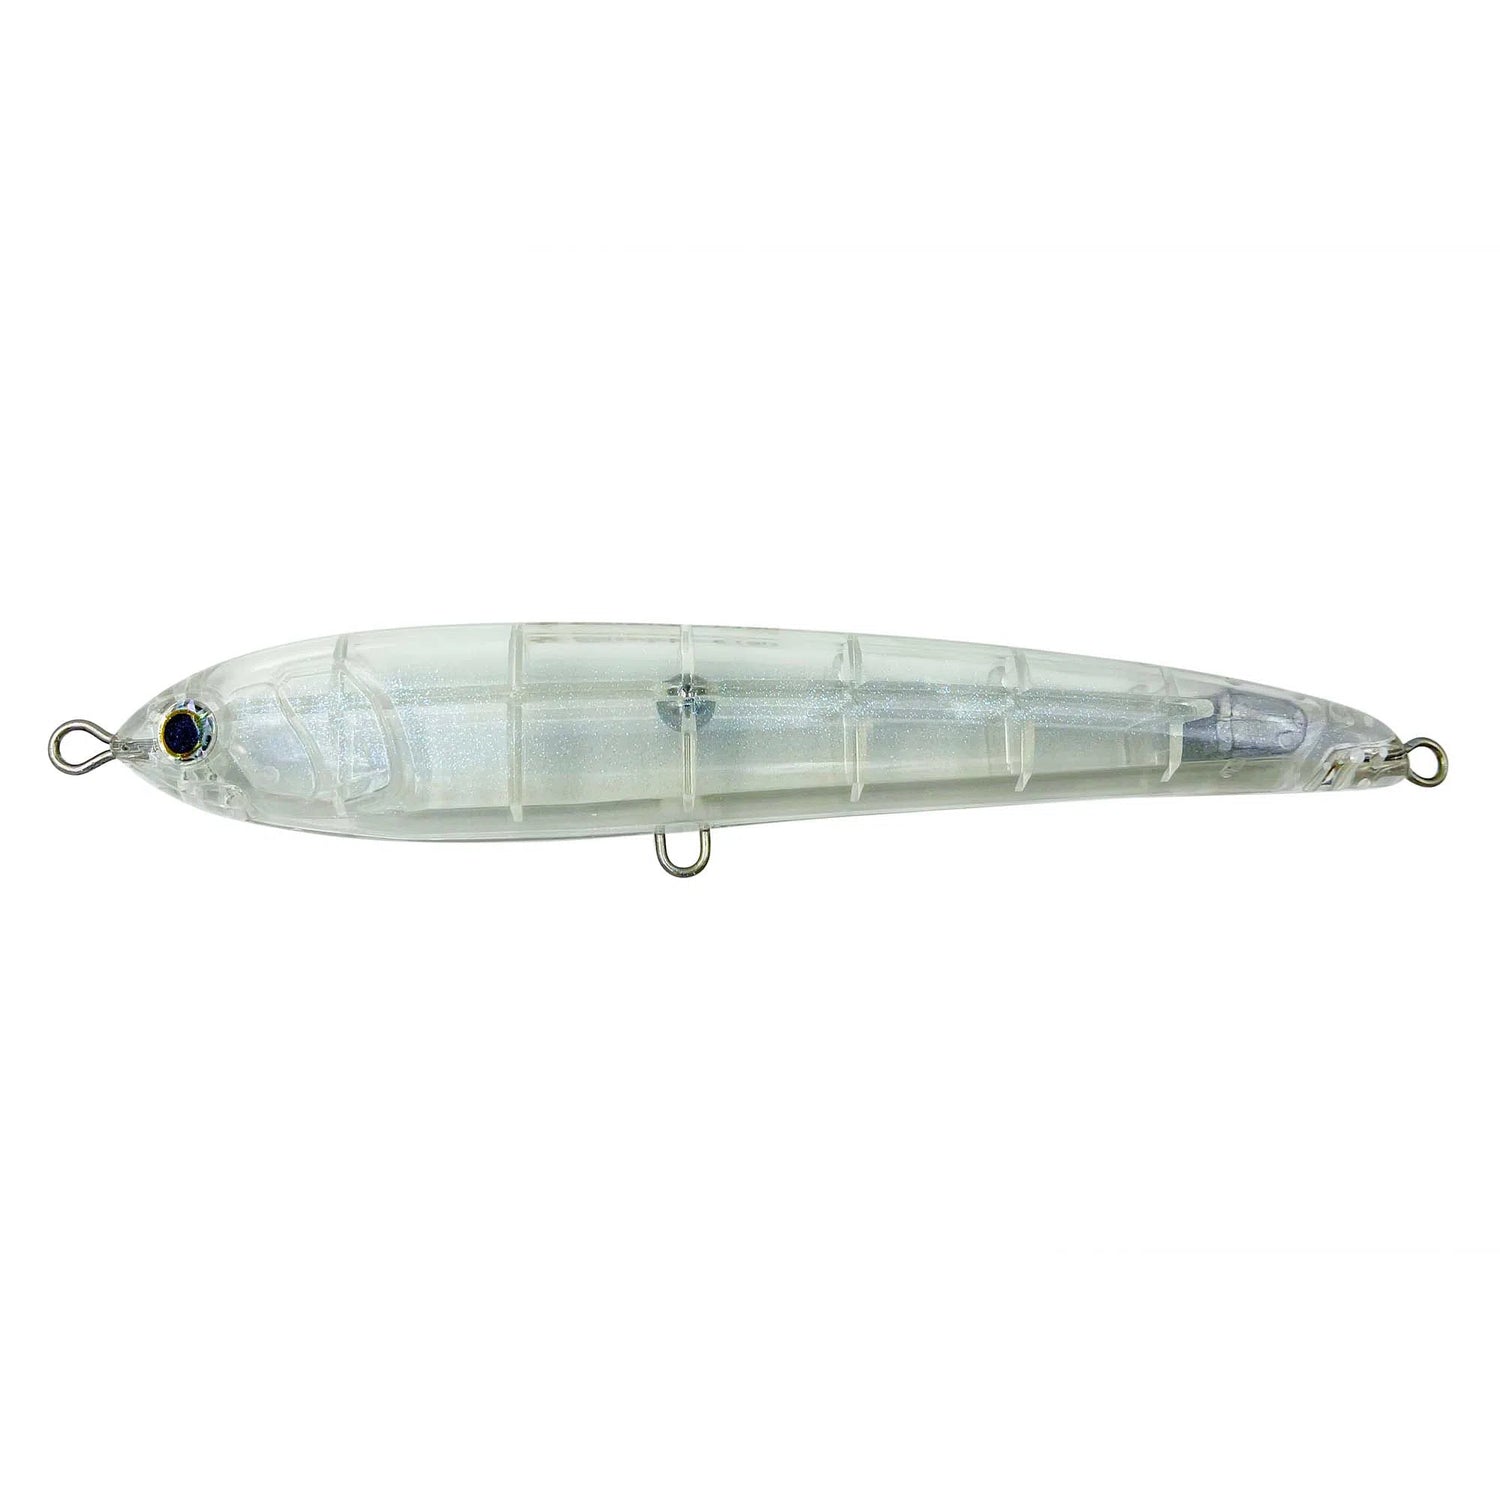 Maria Rapido Floating-Lure - Poppers, Stickbaits & Pencils-Maria-B28C-190mm - 65g-Fishing Station